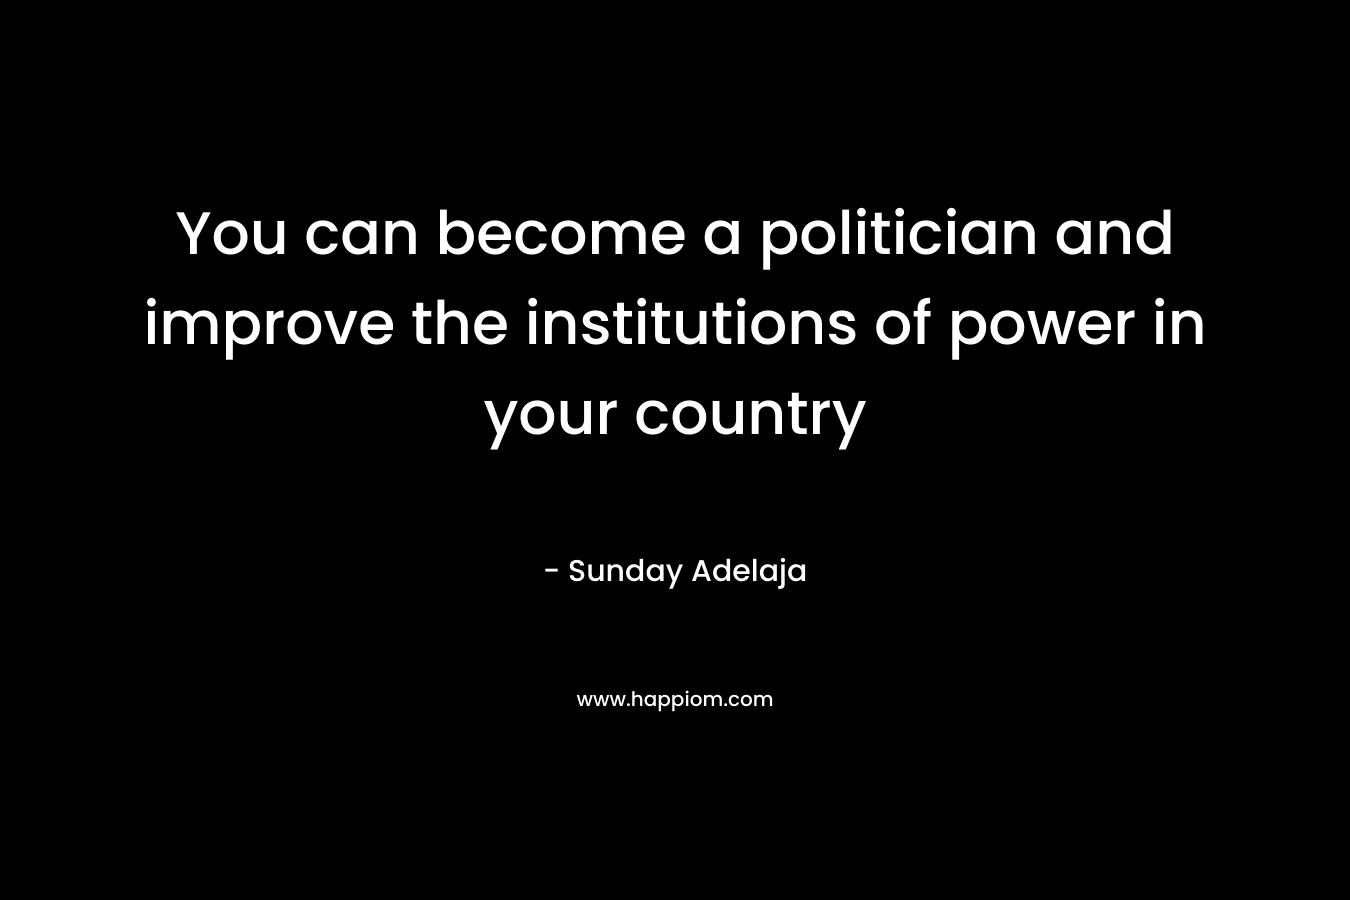 You can become a politician and improve the institutions of power in your country – Sunday Adelaja